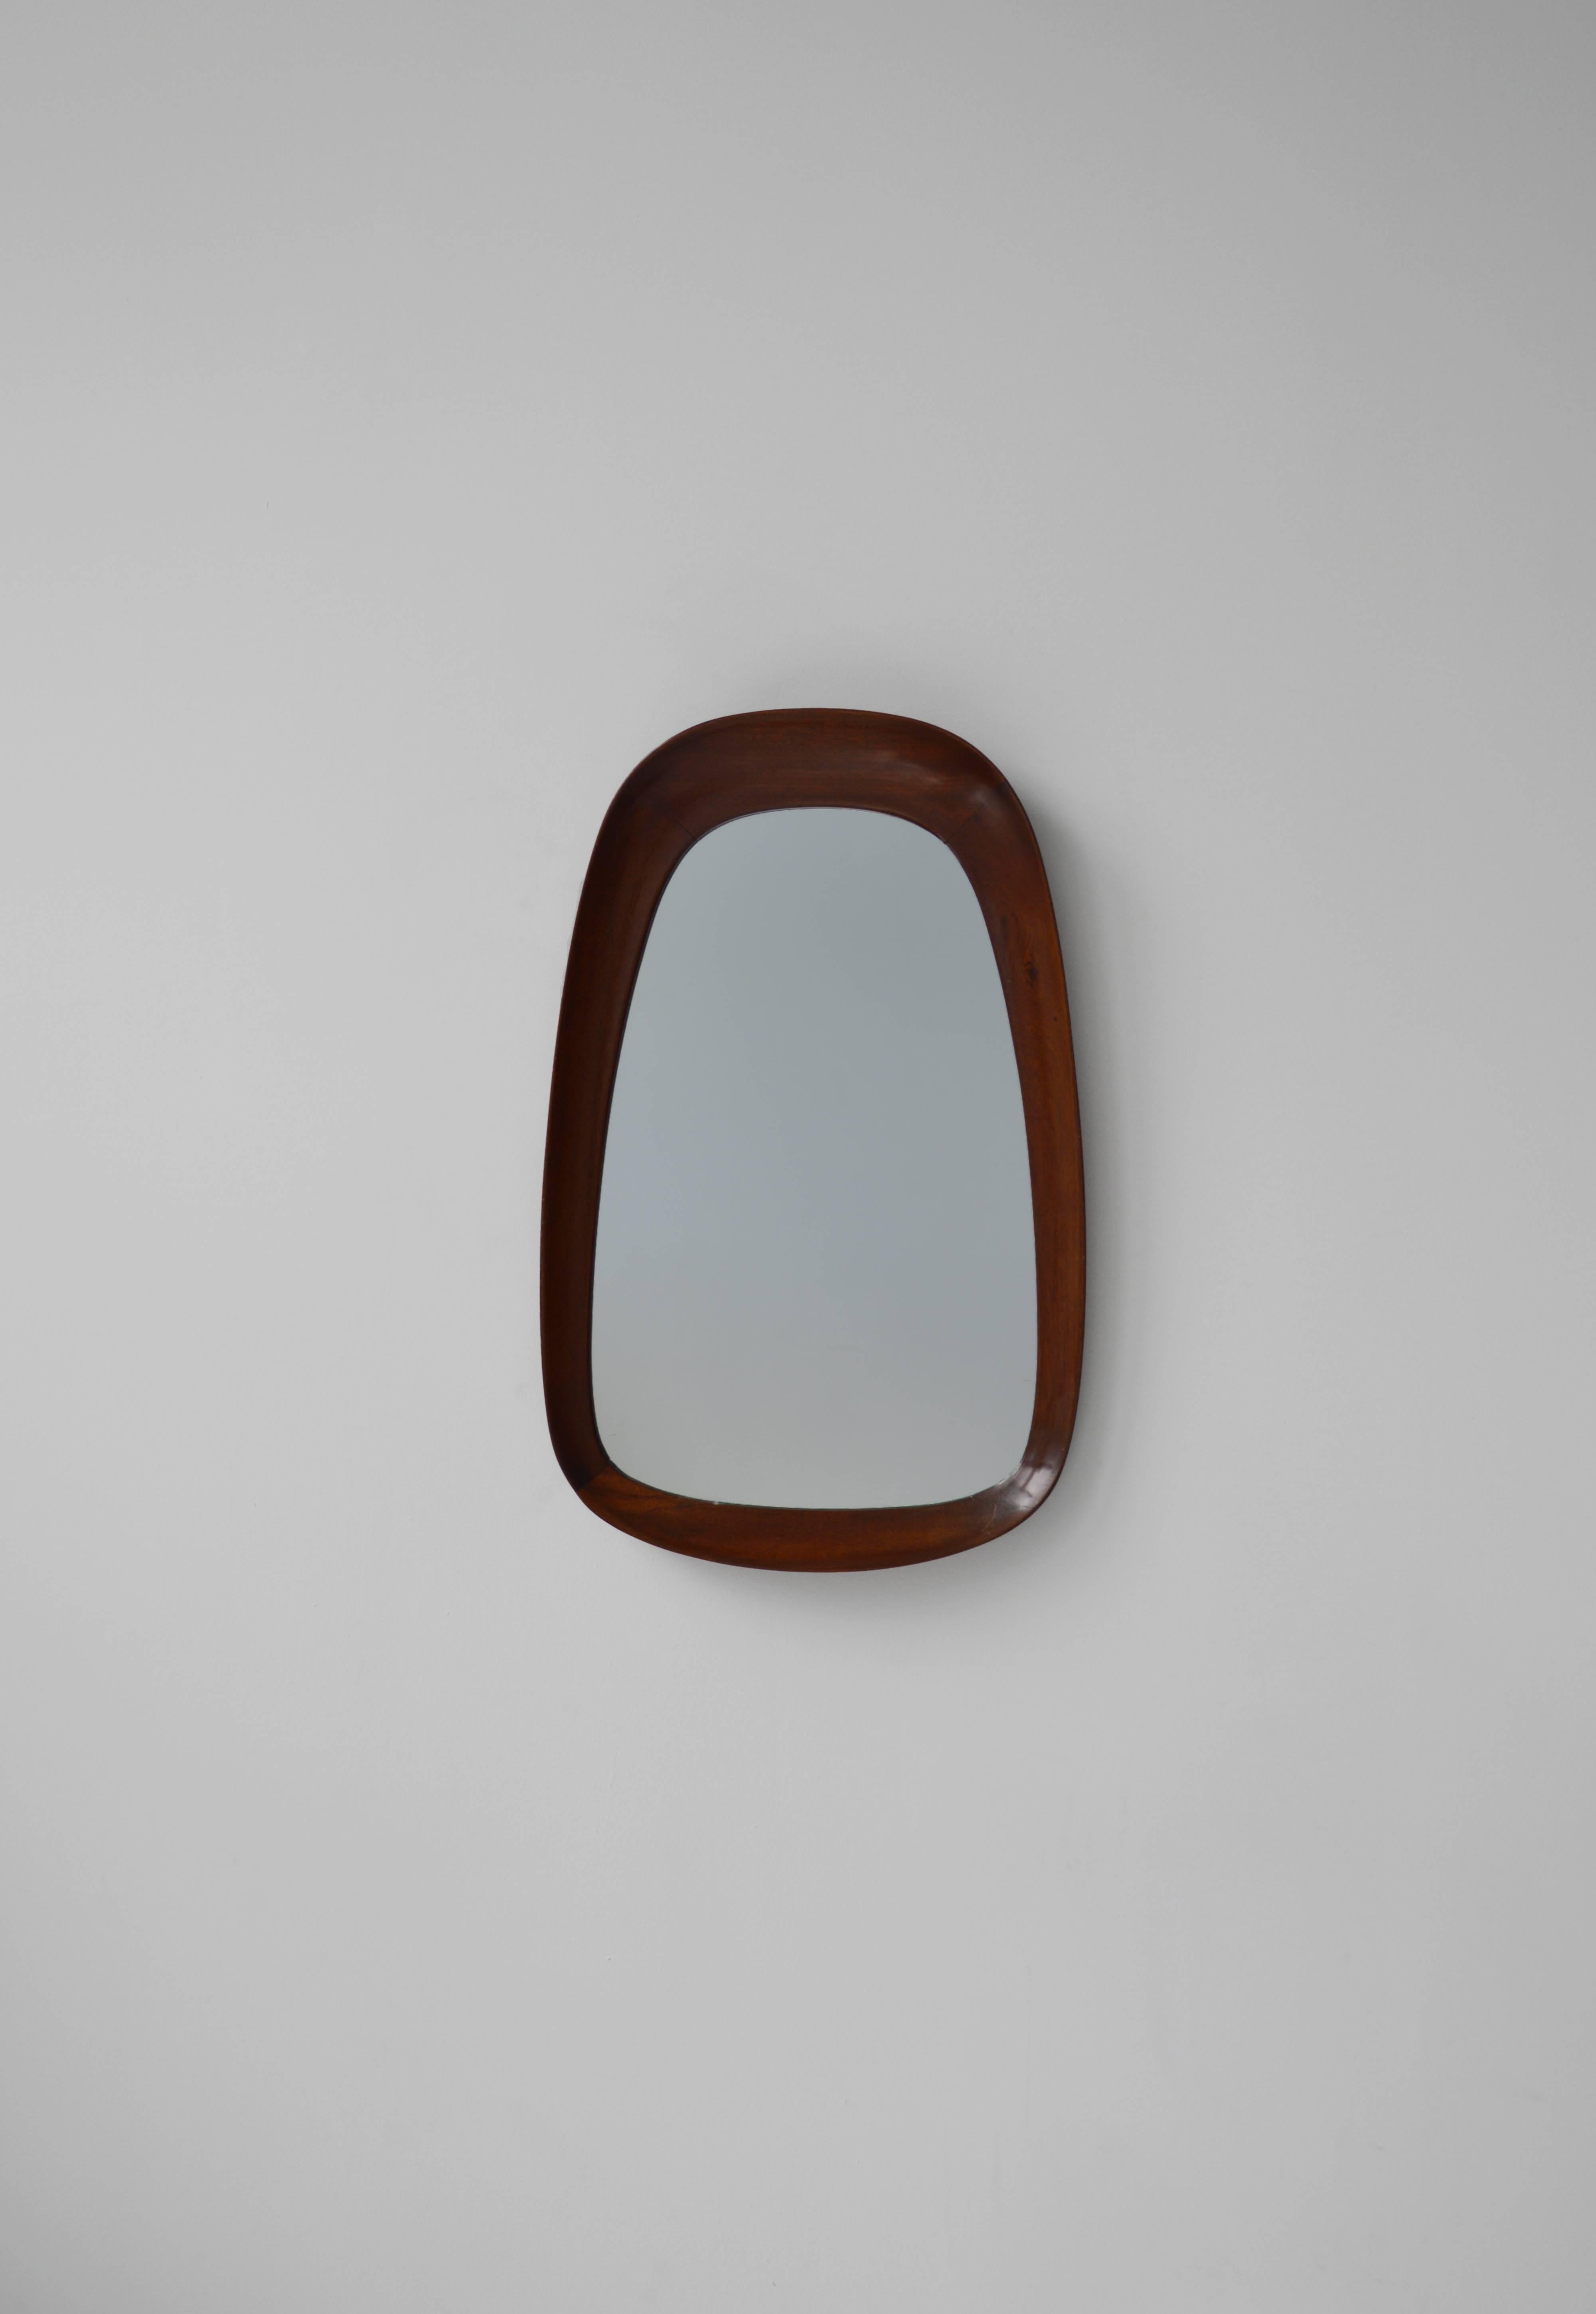 This vintage Scandinavian modern wooden framed mirror has a beautiful organic shape. In excellent condition, this Danish frame has a lovely, warm finish and beautiful patina.